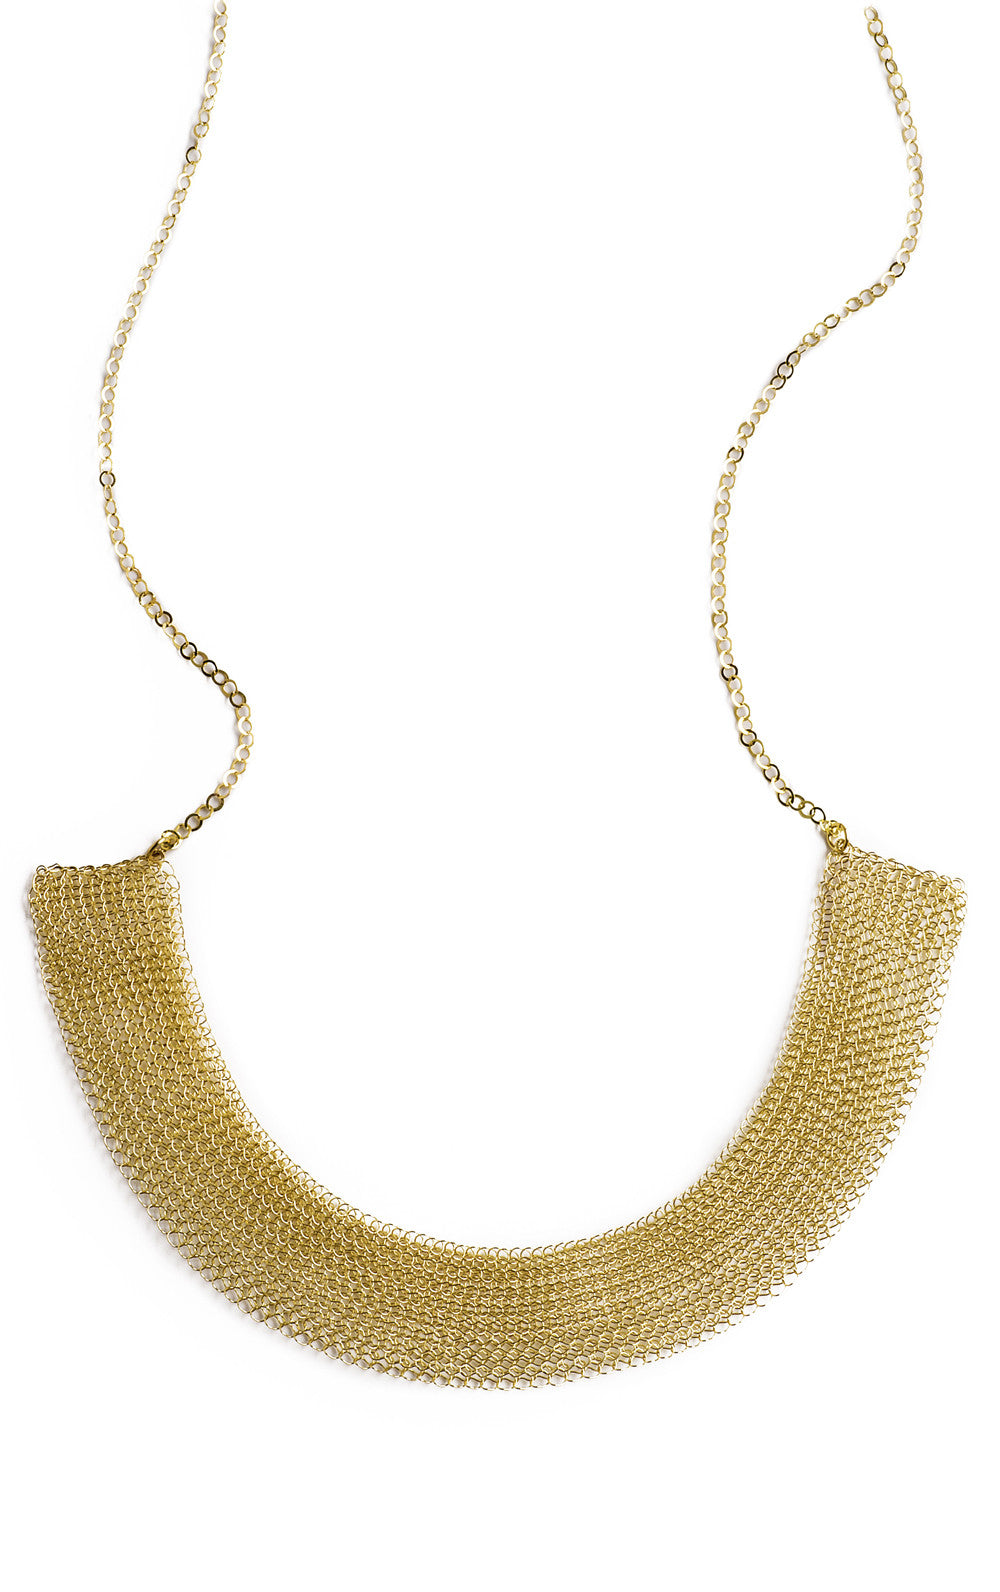 U , short Wire crochet collar necklace in gold filed - Yooladesign